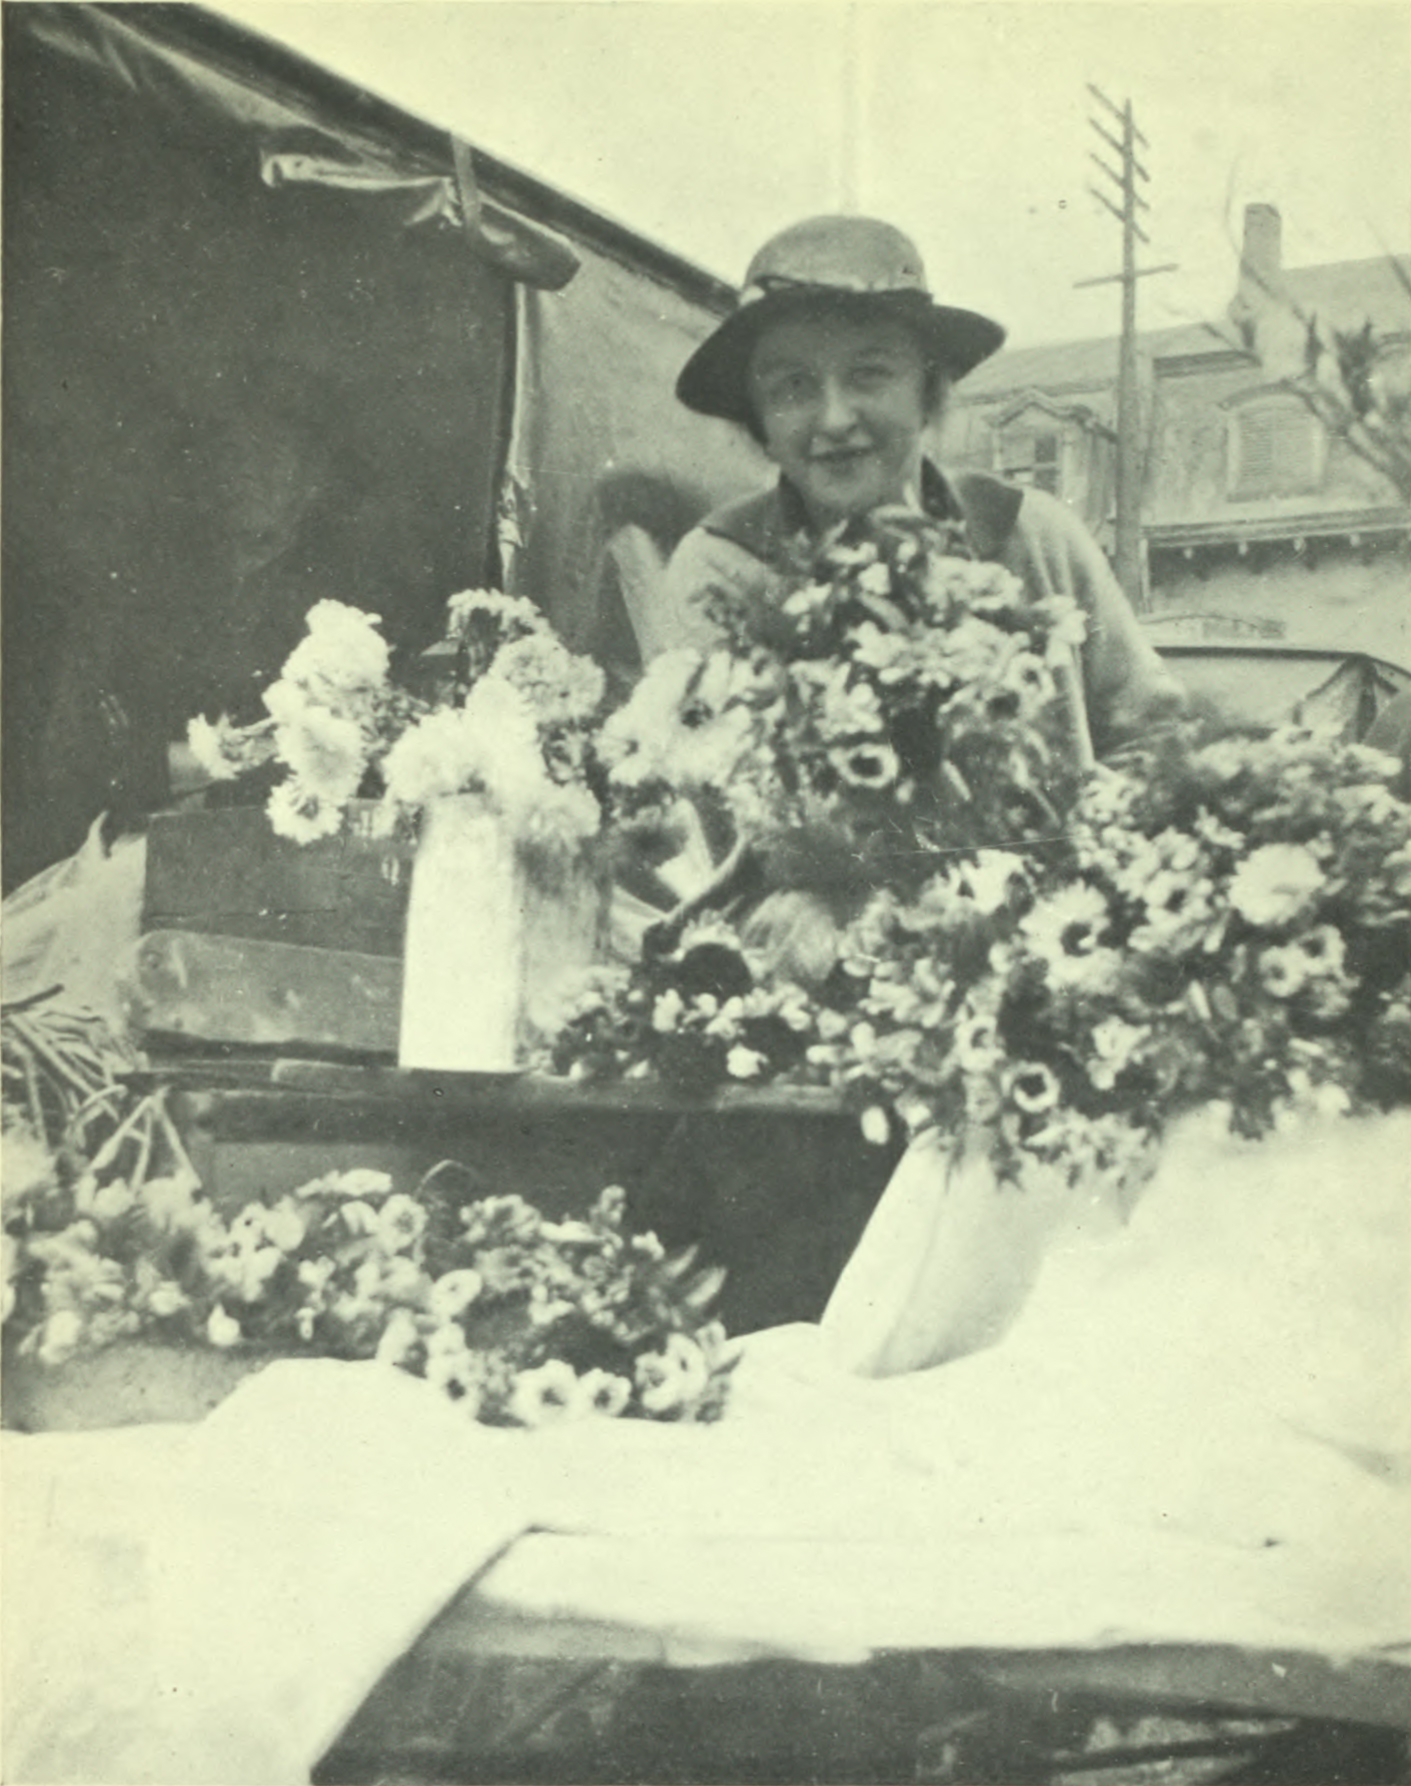 Woman selling flowers at the market.